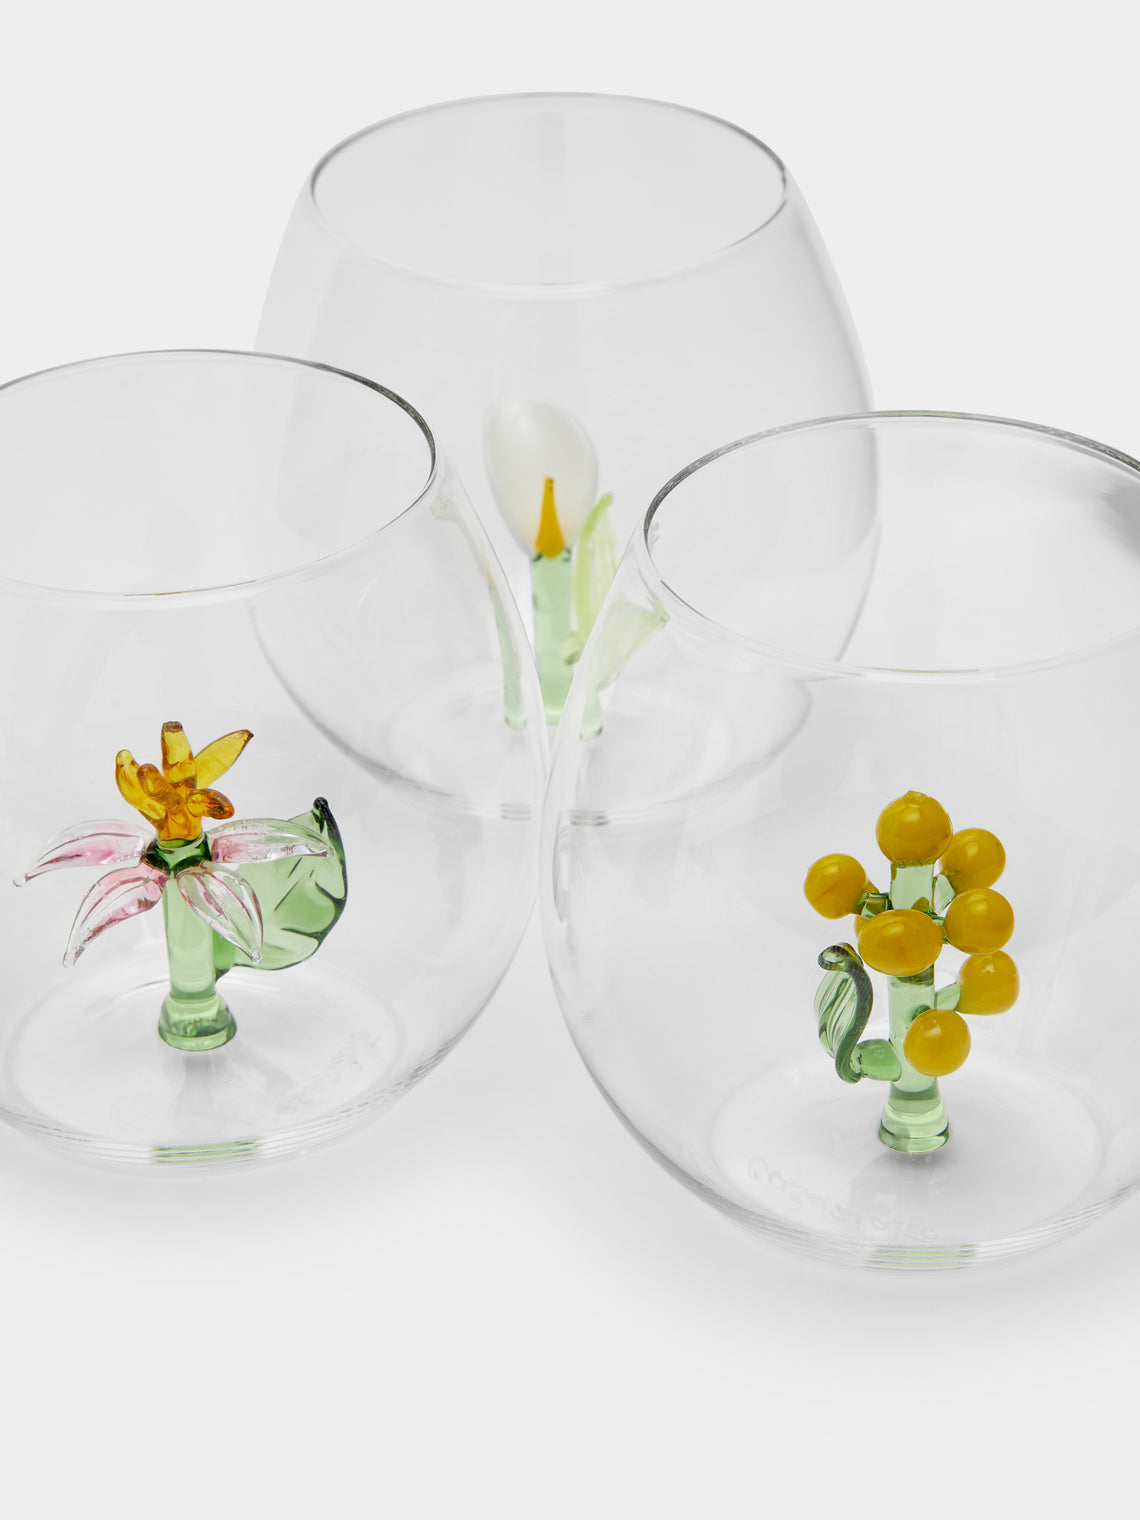 Casarialto - Flower Power Hand-Blown Murano Glass Tumblers (Set of 6) -  - ABASK